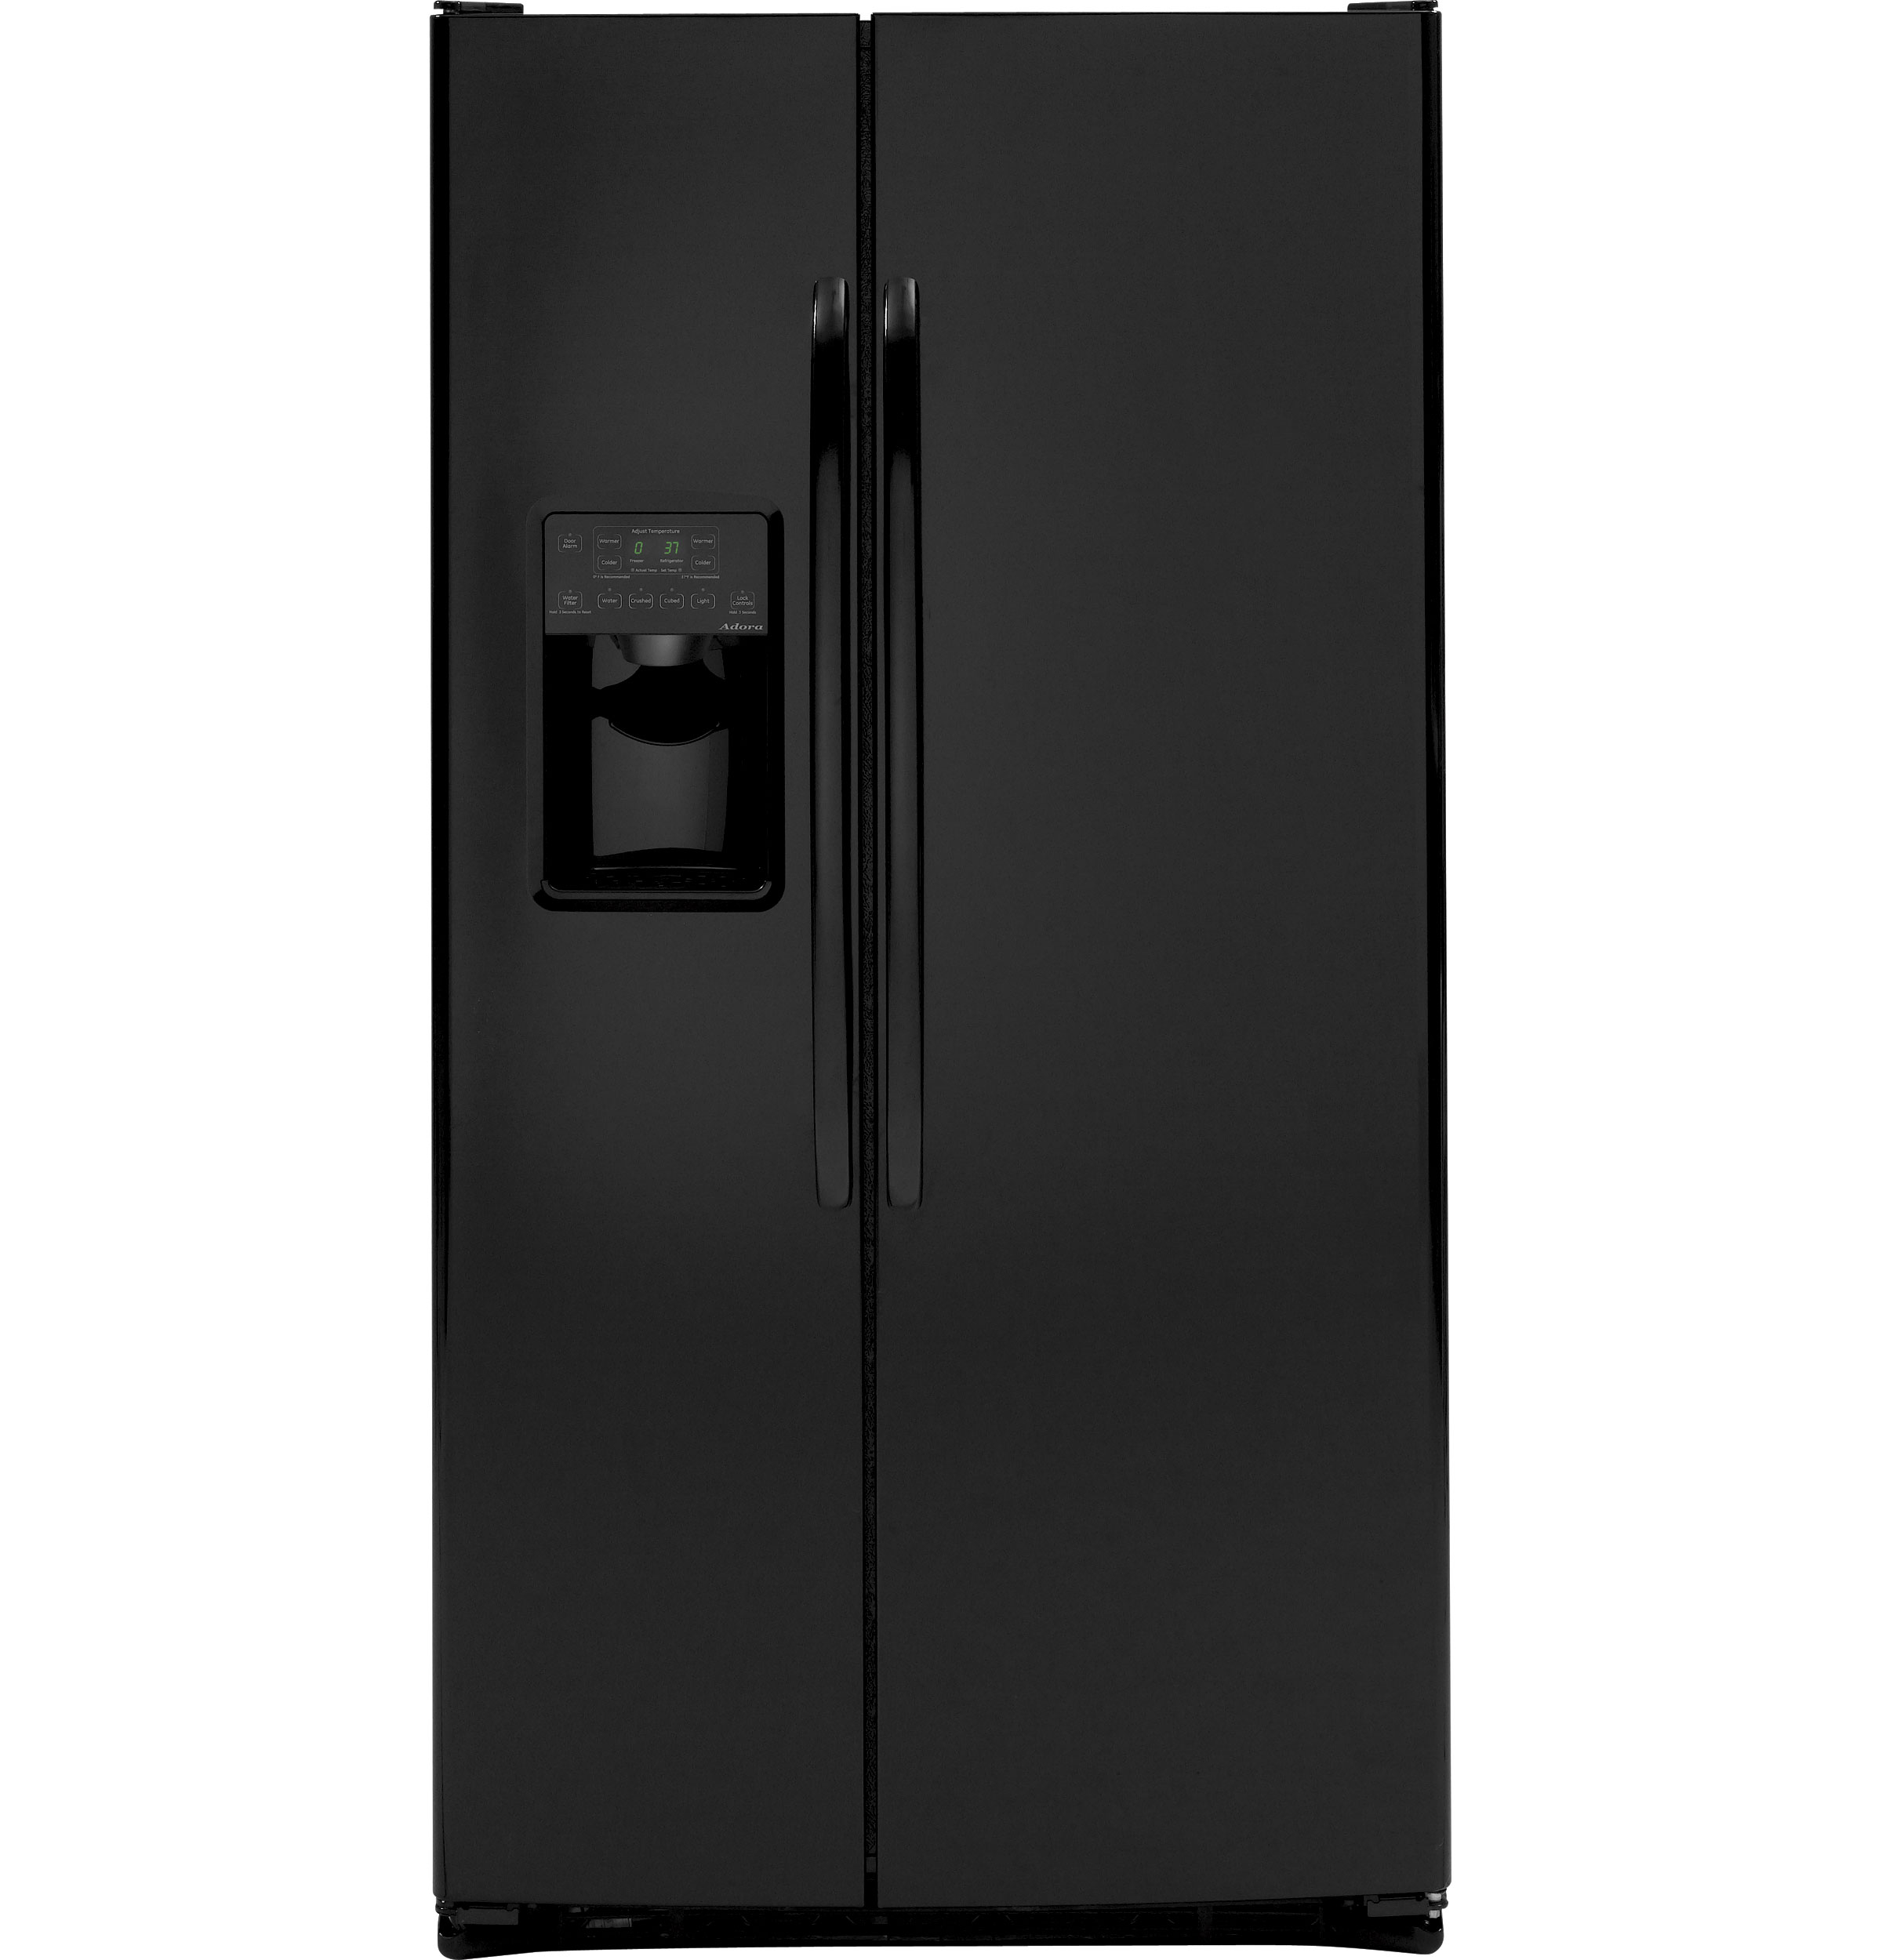 Adora series by GE® ENERGY STAR® 25.9 Cu. Ft. Side-By-Side Refrigerator